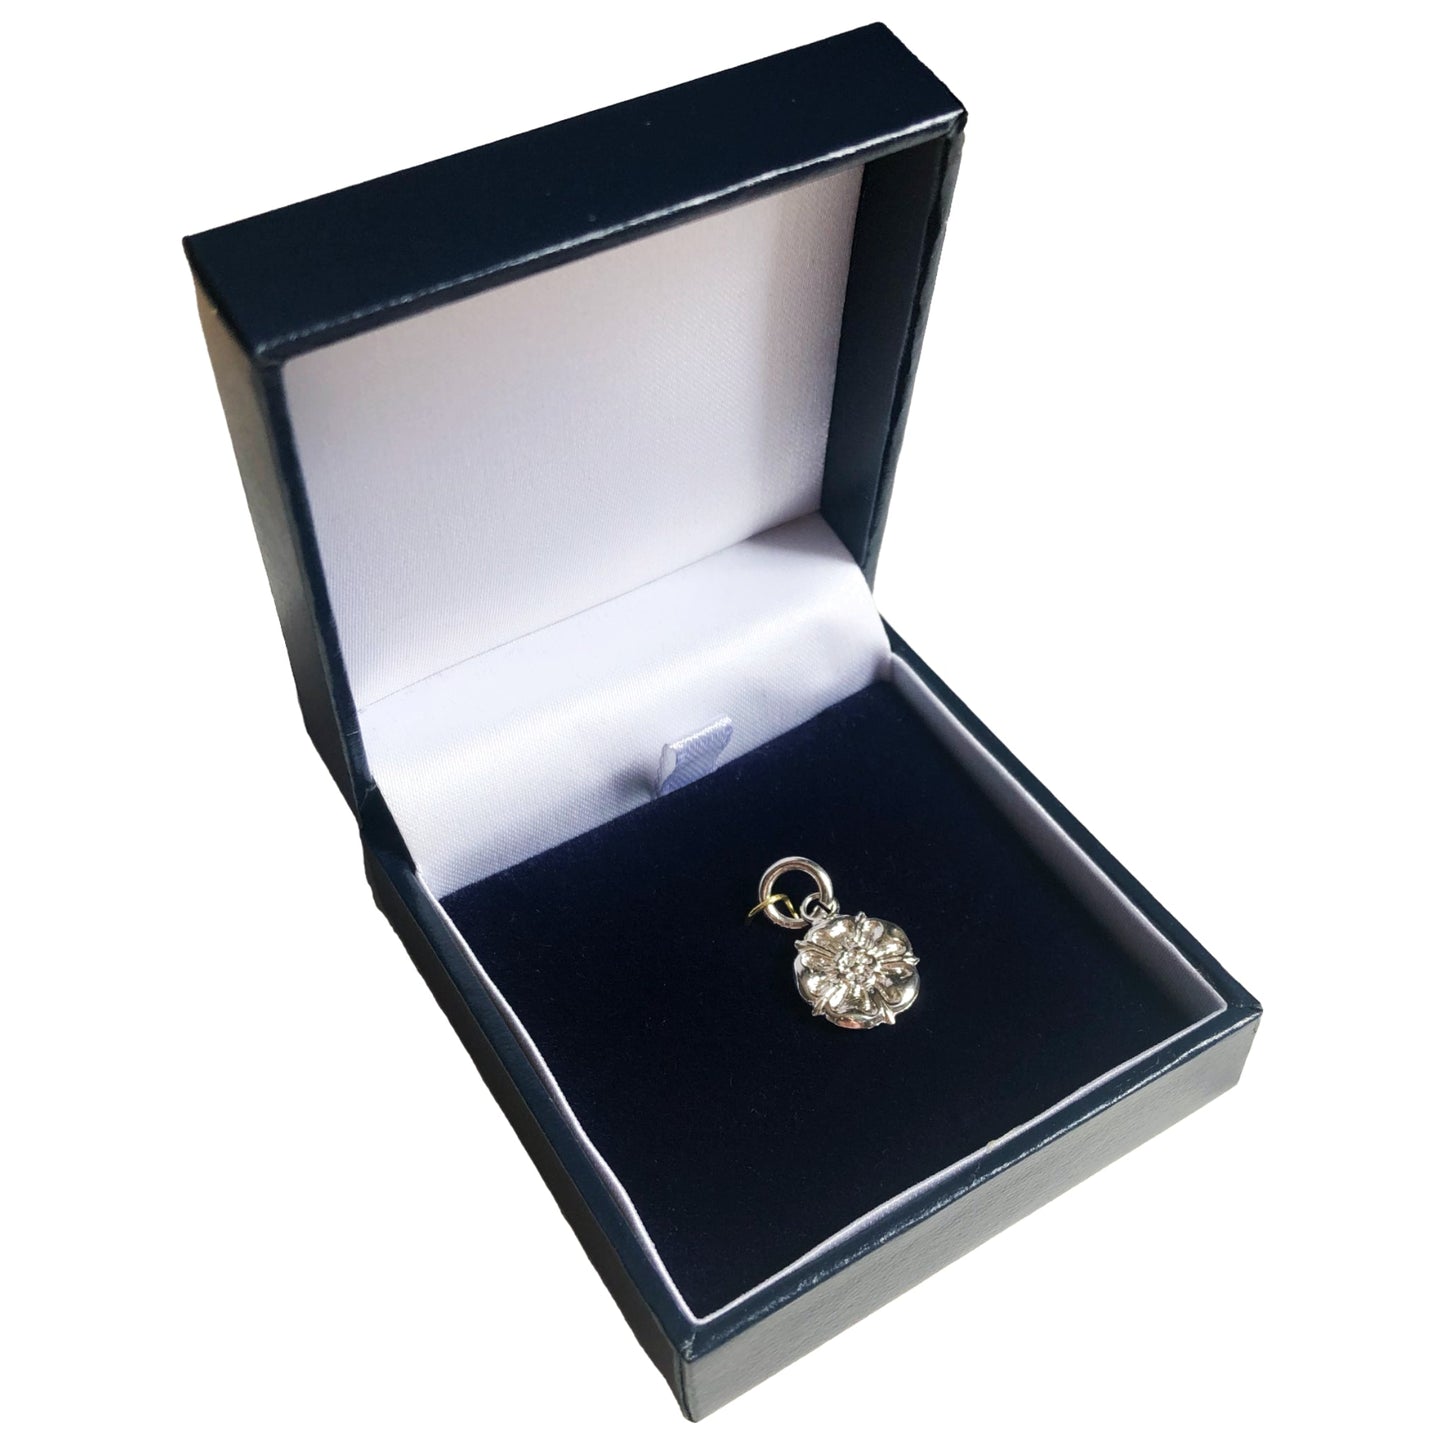 Yorkshire Rose Sterling Silver Pendant / Charm - The Great Yorkshire Shop